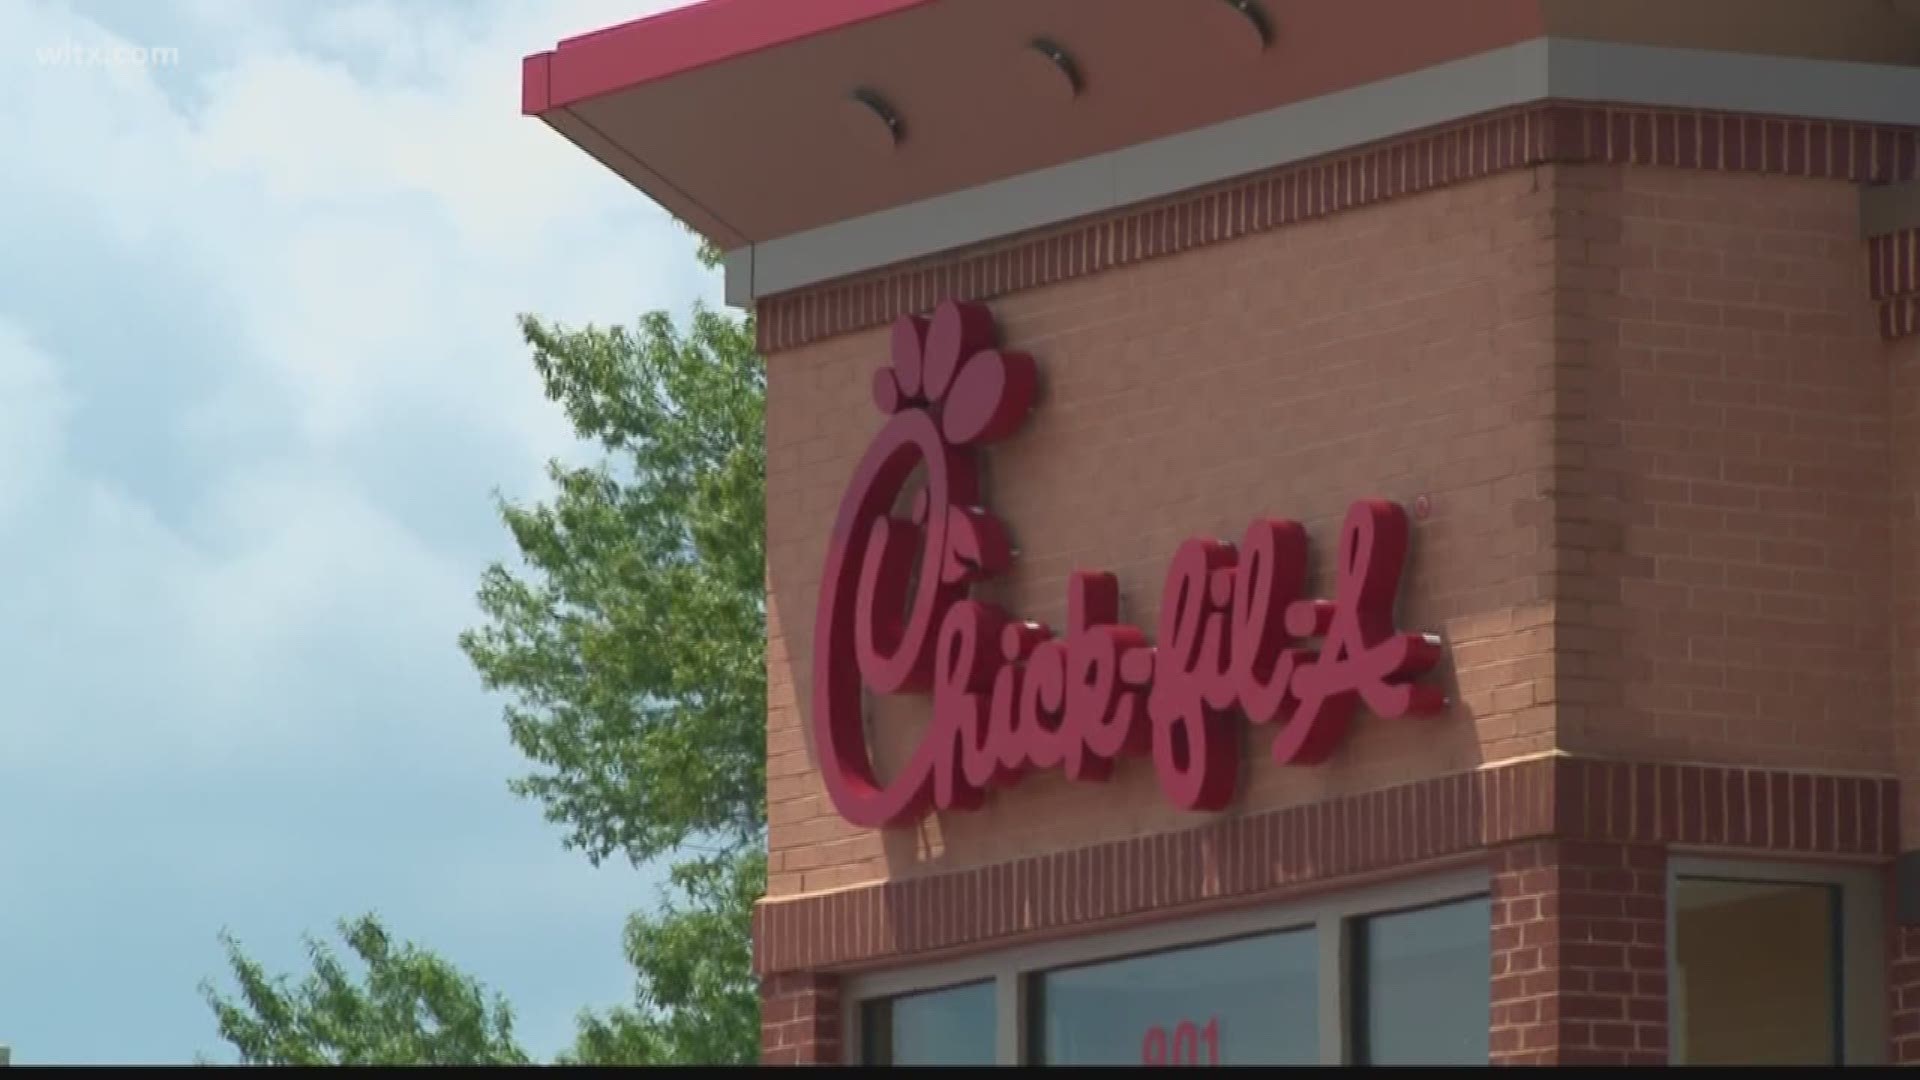 The American Customer Satisfaction Index report of 2018 says Chick-Fil-A top all other restaurants.